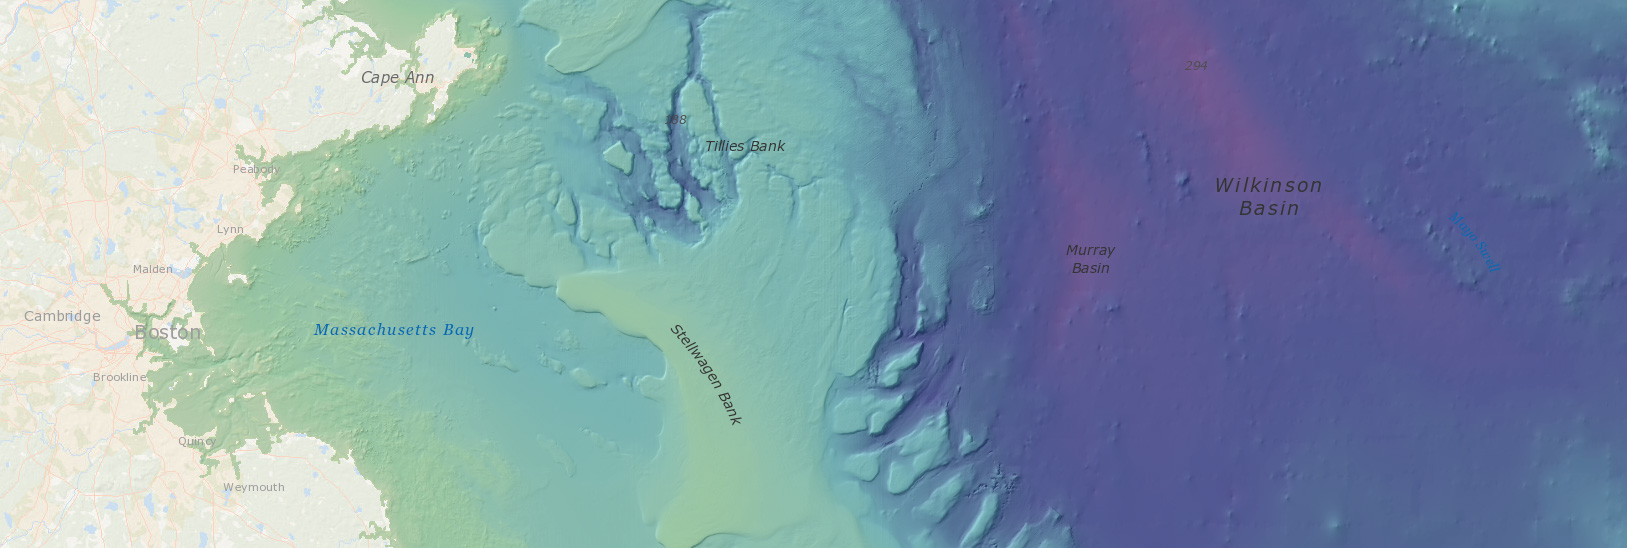 Bathymetry (depth) from Boston Harbor into offshore waters